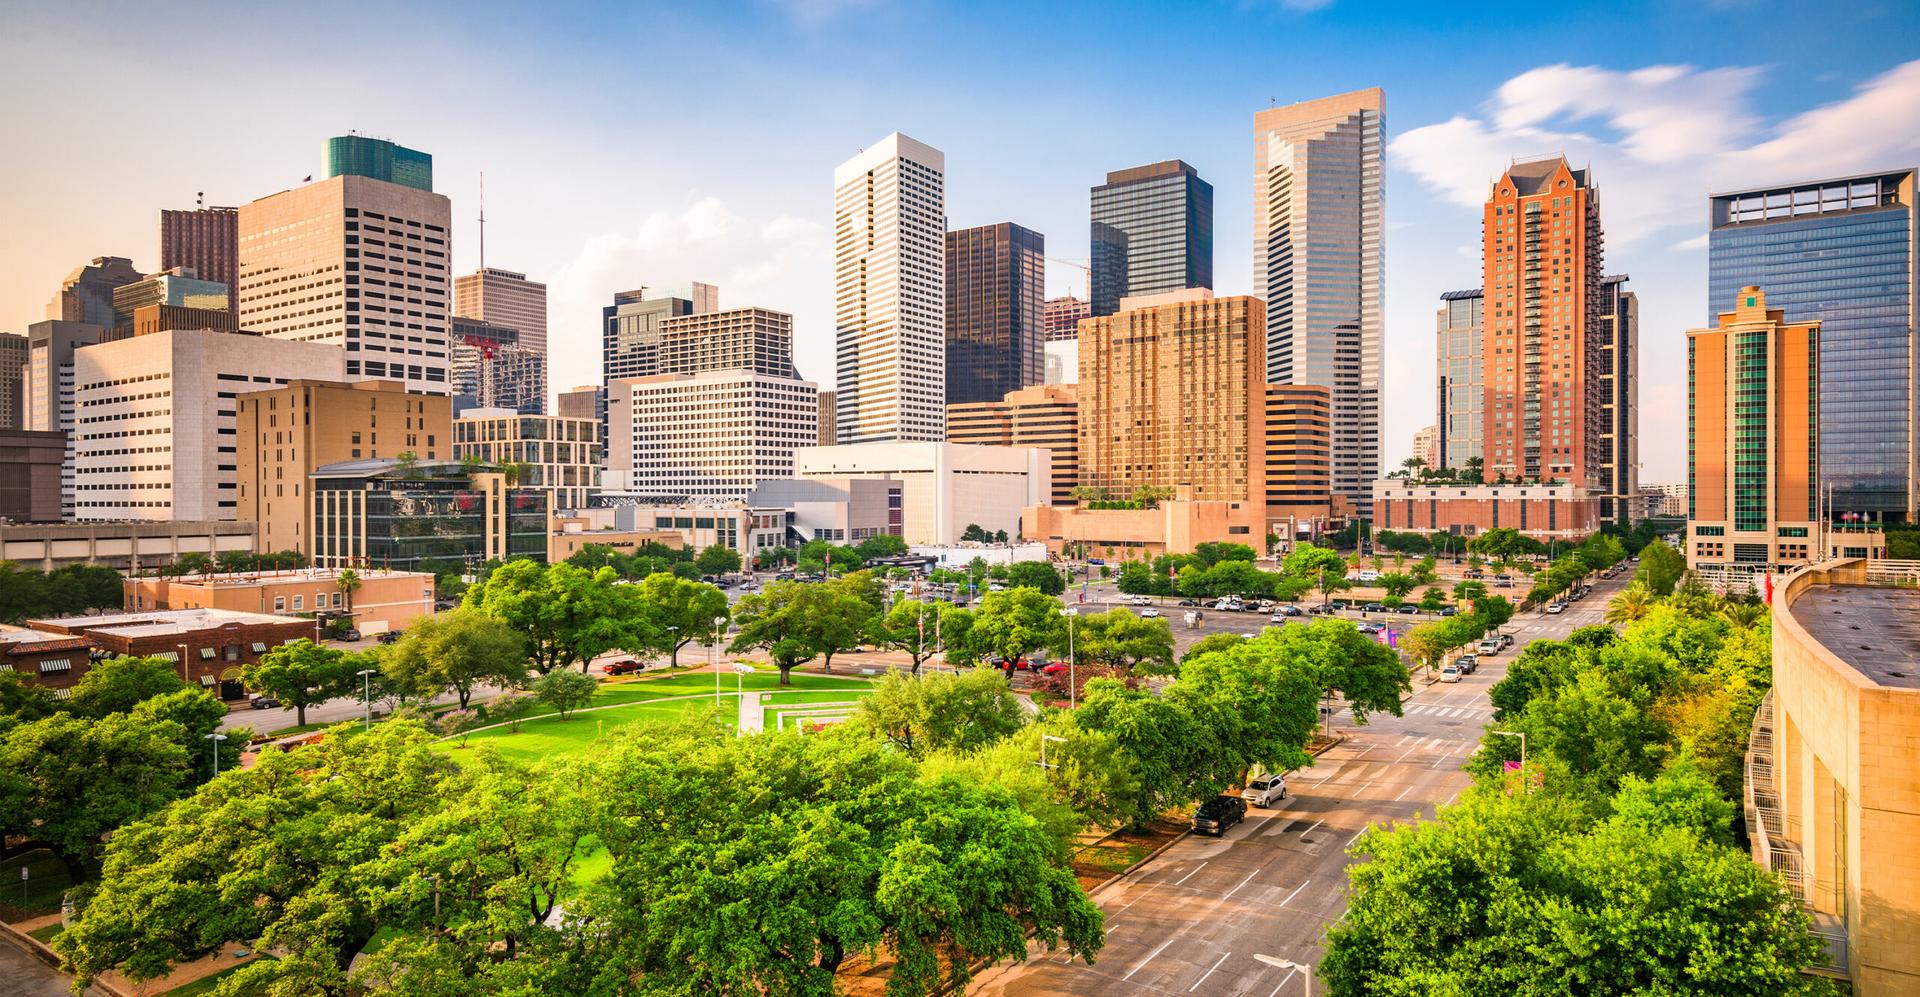 Looking for Affordable Housing? 5 ways to save money on rent in Houston